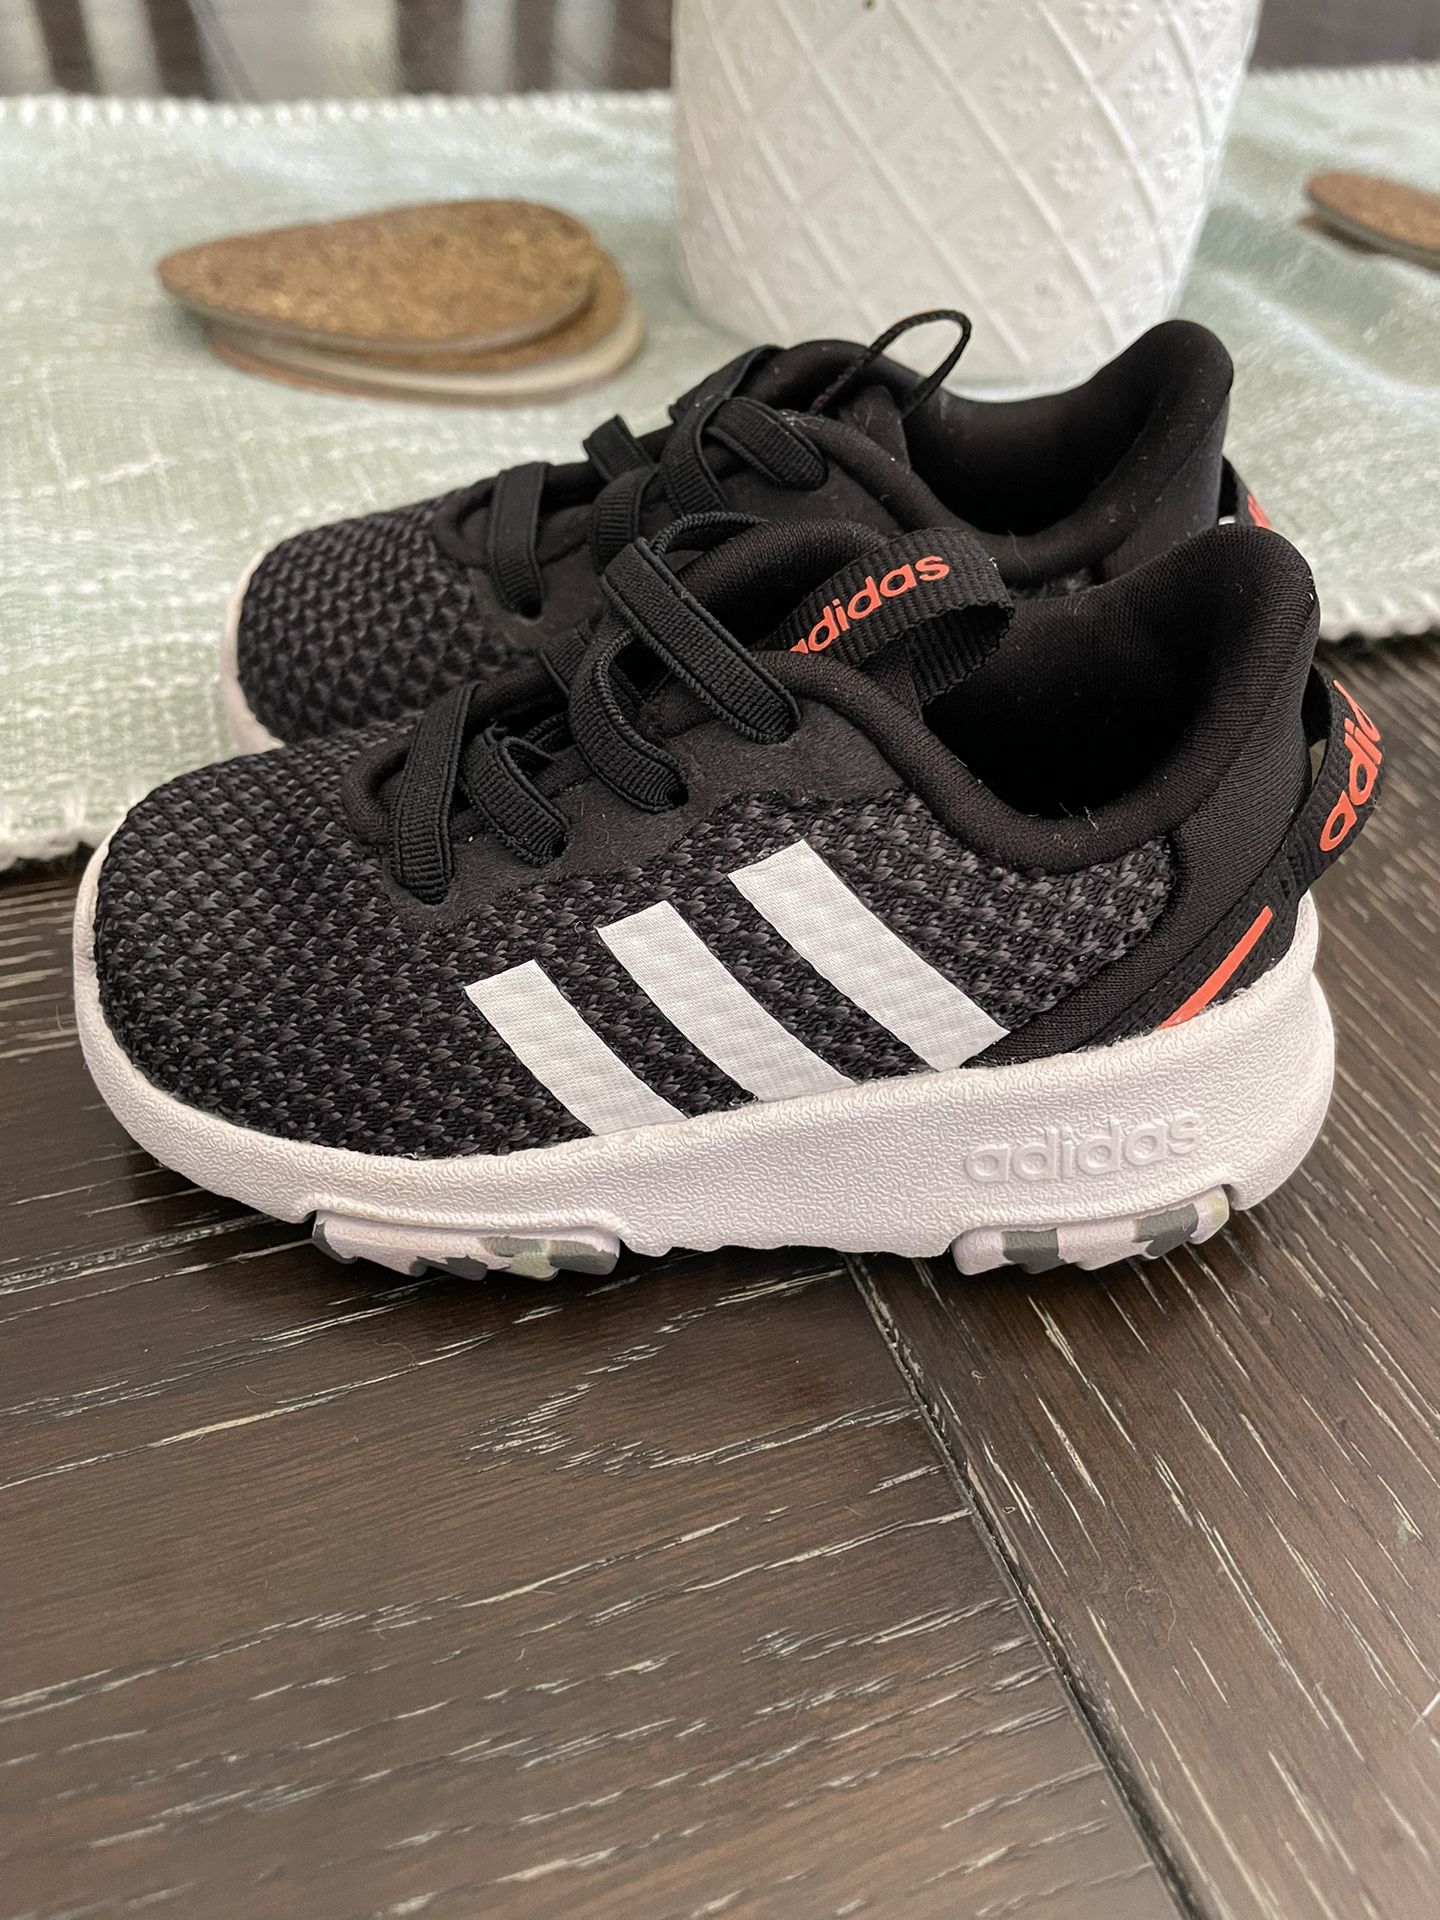 Brand New Baby/toddler Adidas Shoes for Sale in CA - OfferUp